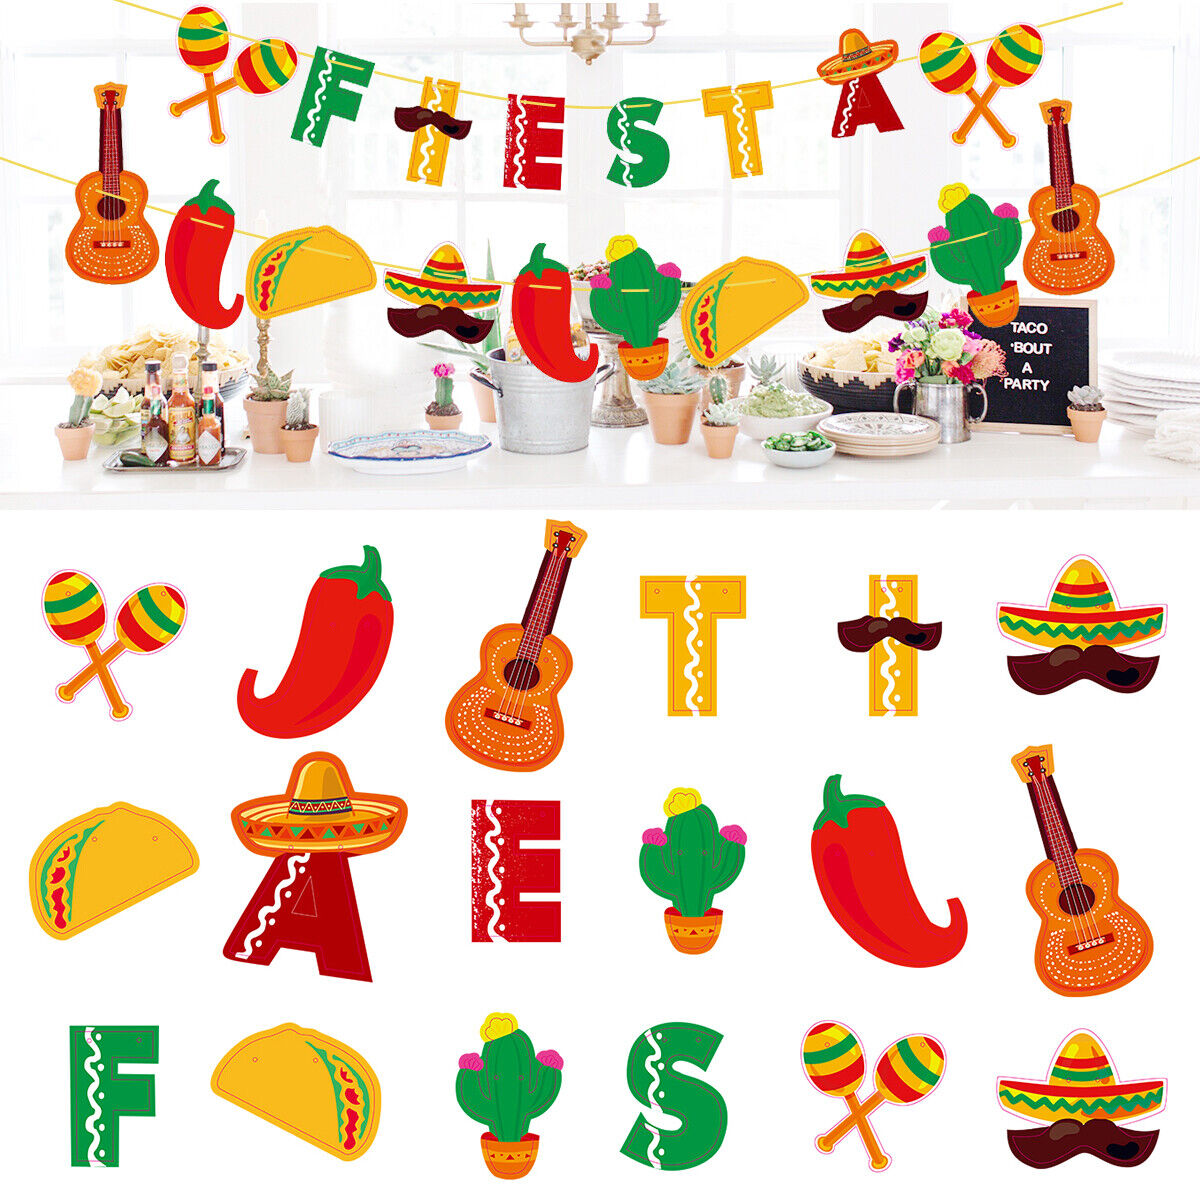 FIESTA PARTY Cups - Fiesta Party Mexican Birthday Fiesta Favors